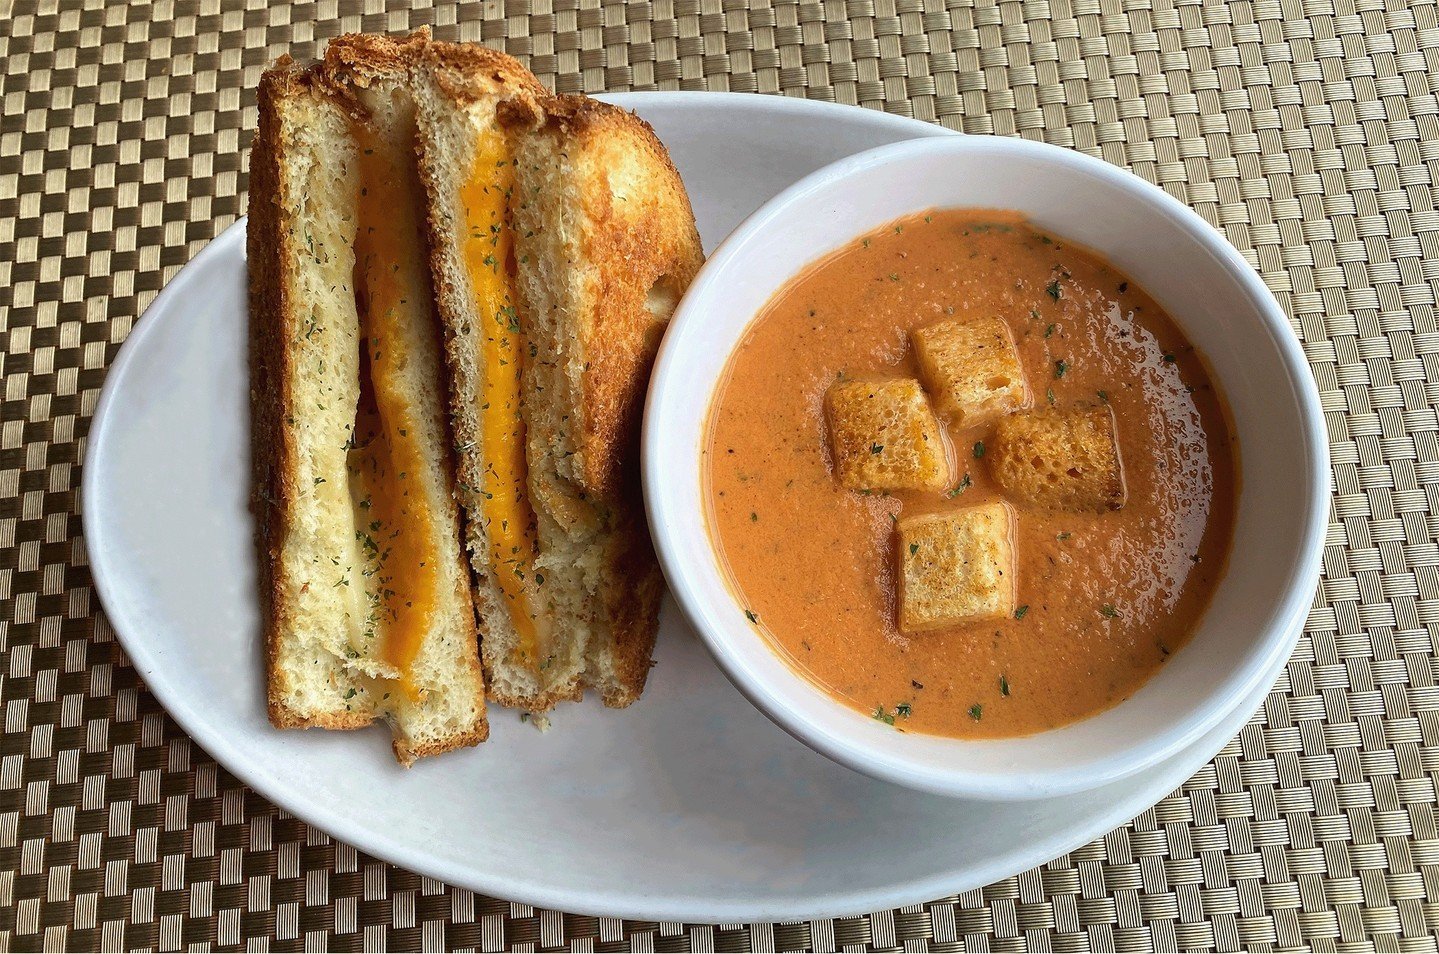 It's National Grilled Cheese Sandwich Day - eat accordingly! Our grilled sando features Cheddar and Swiss tucked between thick-cut white bread. We like ours with our house Tomato Bisque for dunking, but you can also get it with fries for the same pri